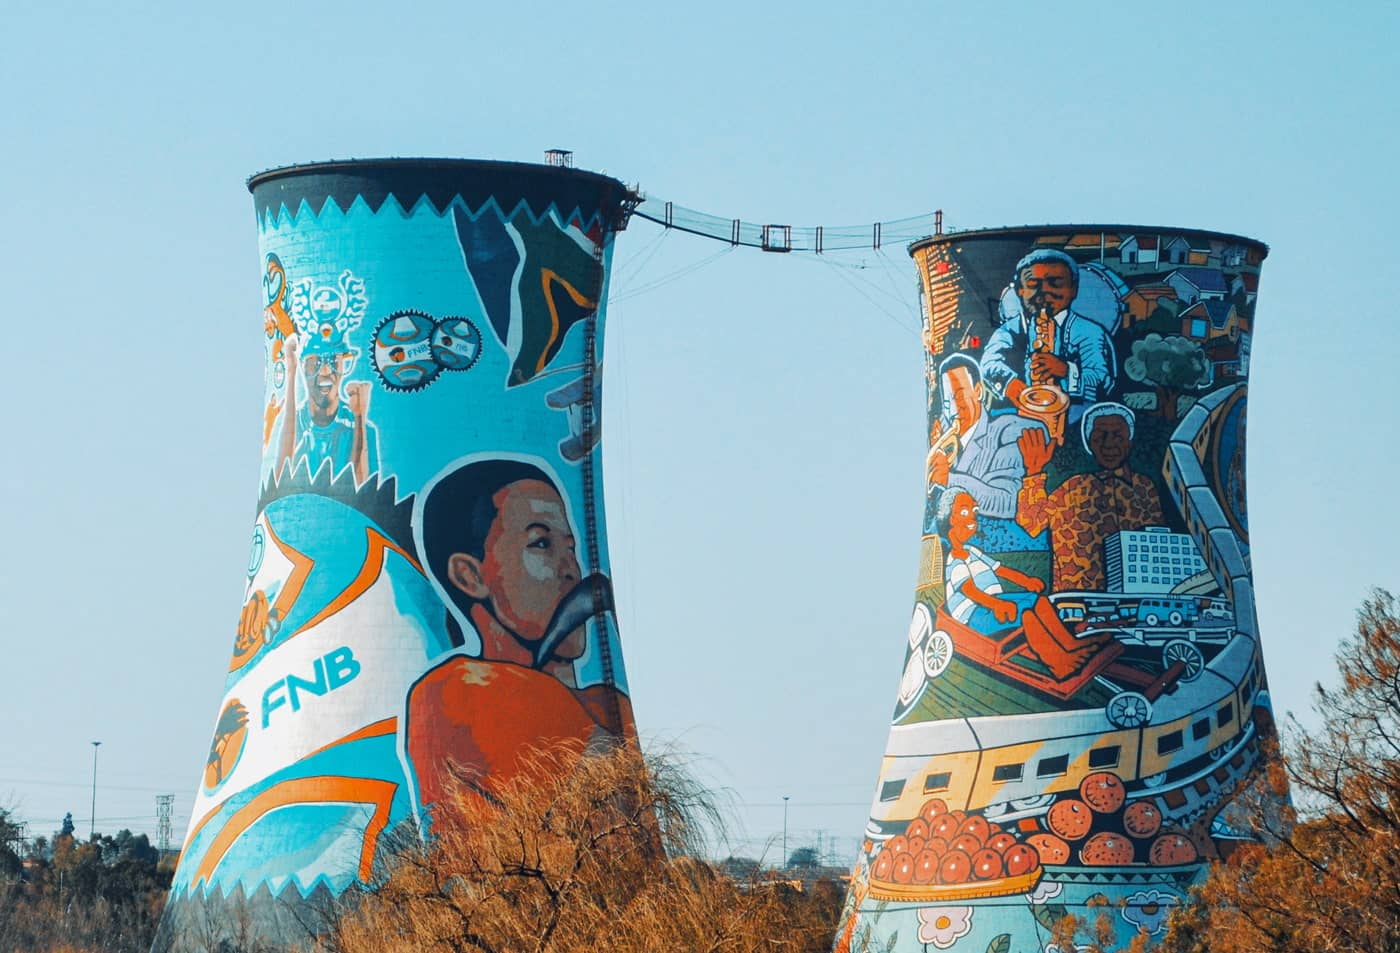 Soweto towers